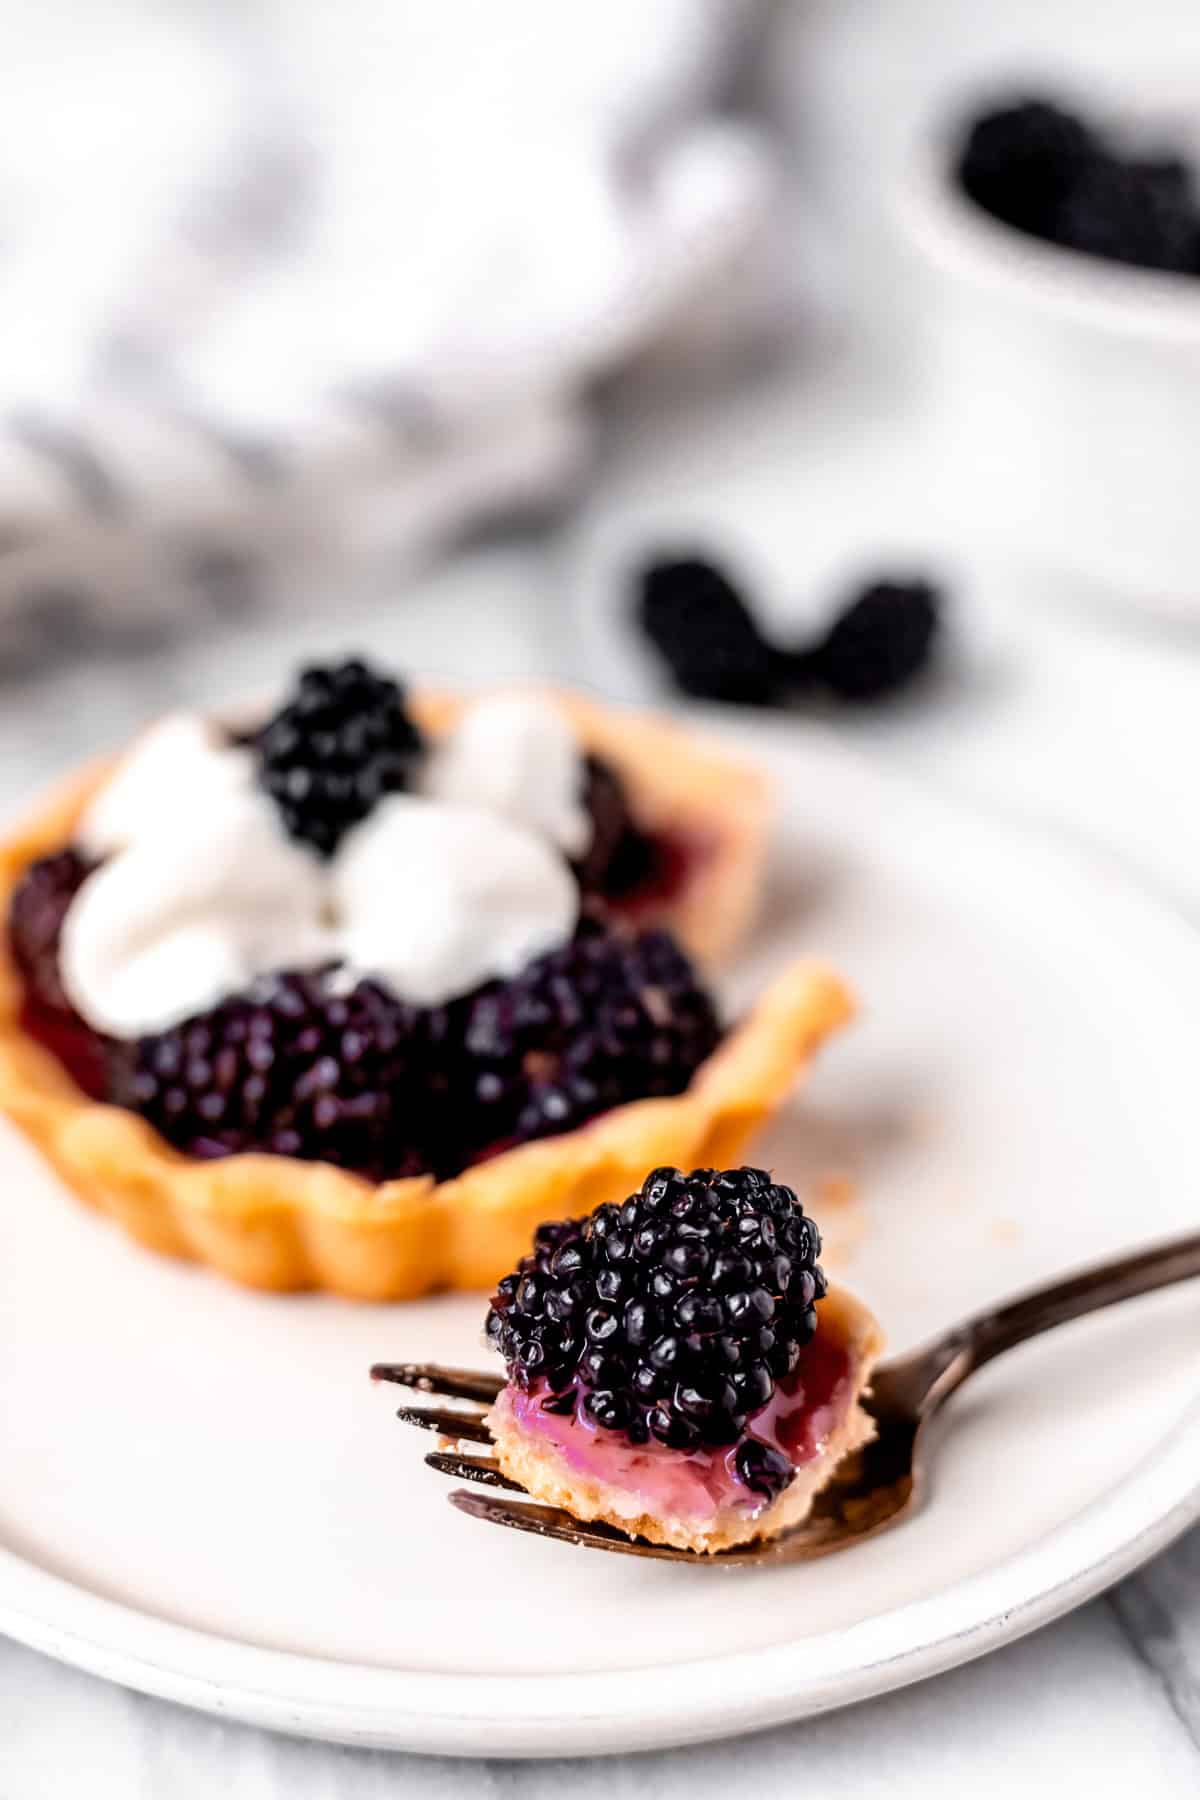 A blackberry tartlet with a bite on a fork in front of it on a small white plate with blackberries, a towel and small white bowl in the background.